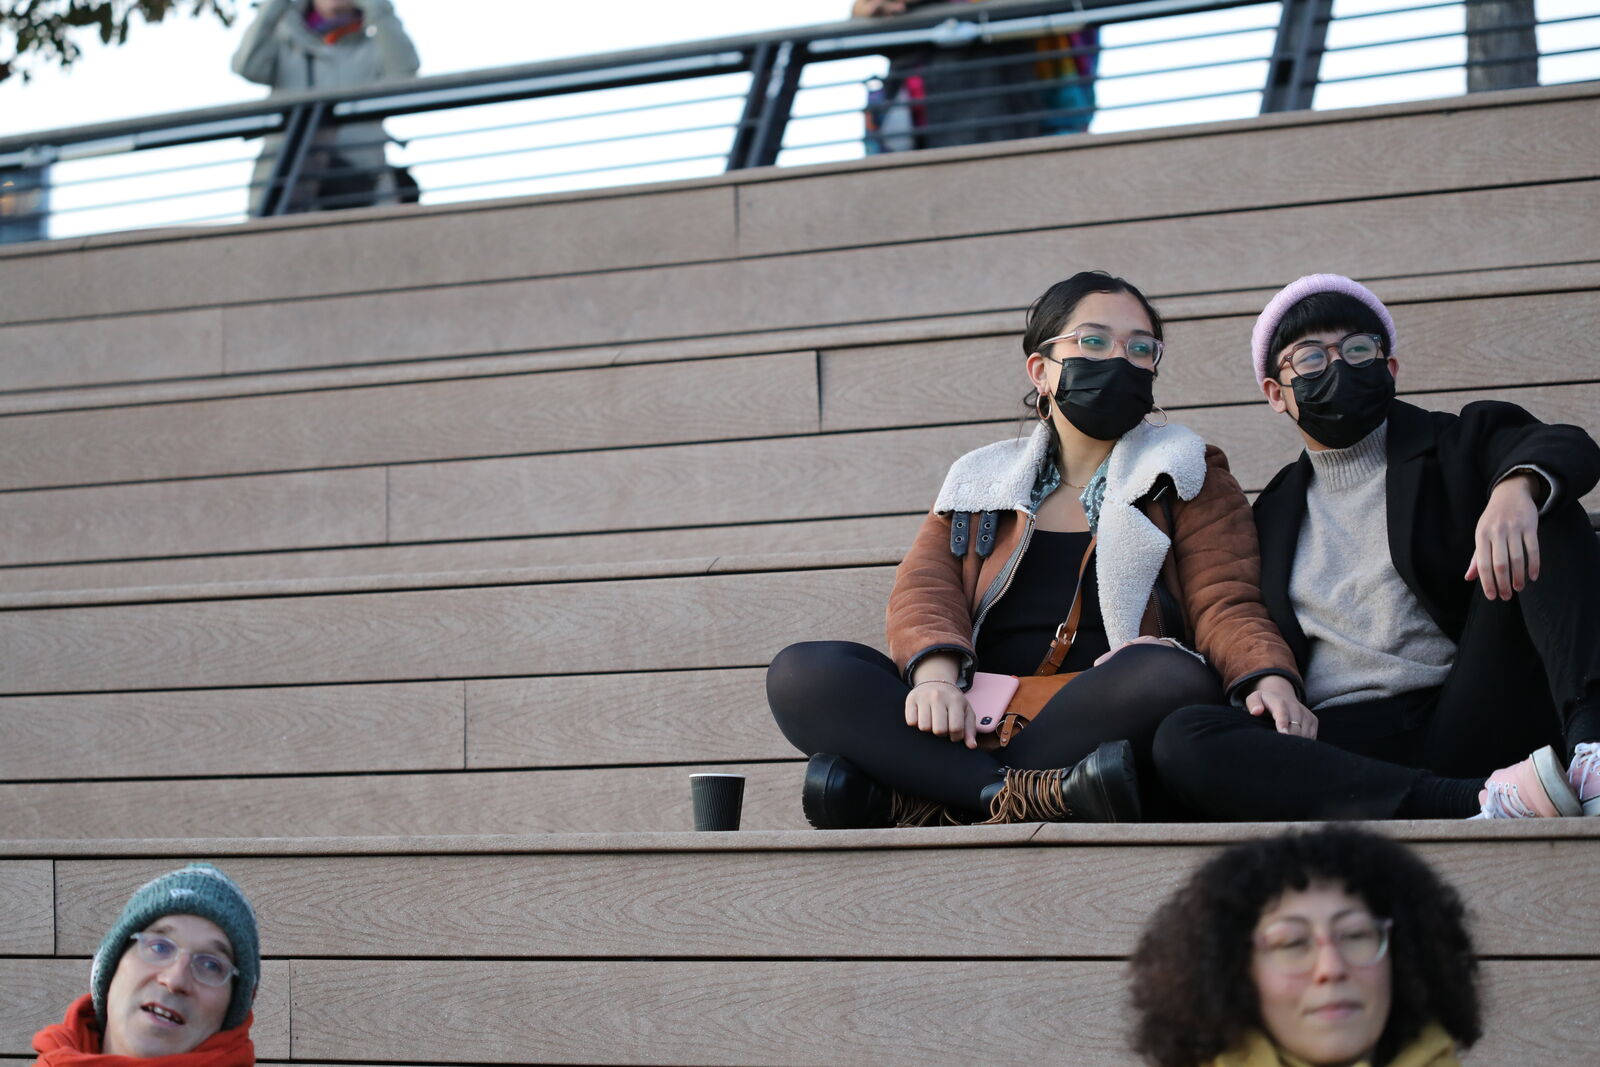 two masked audience members watch the performance from the bleachers